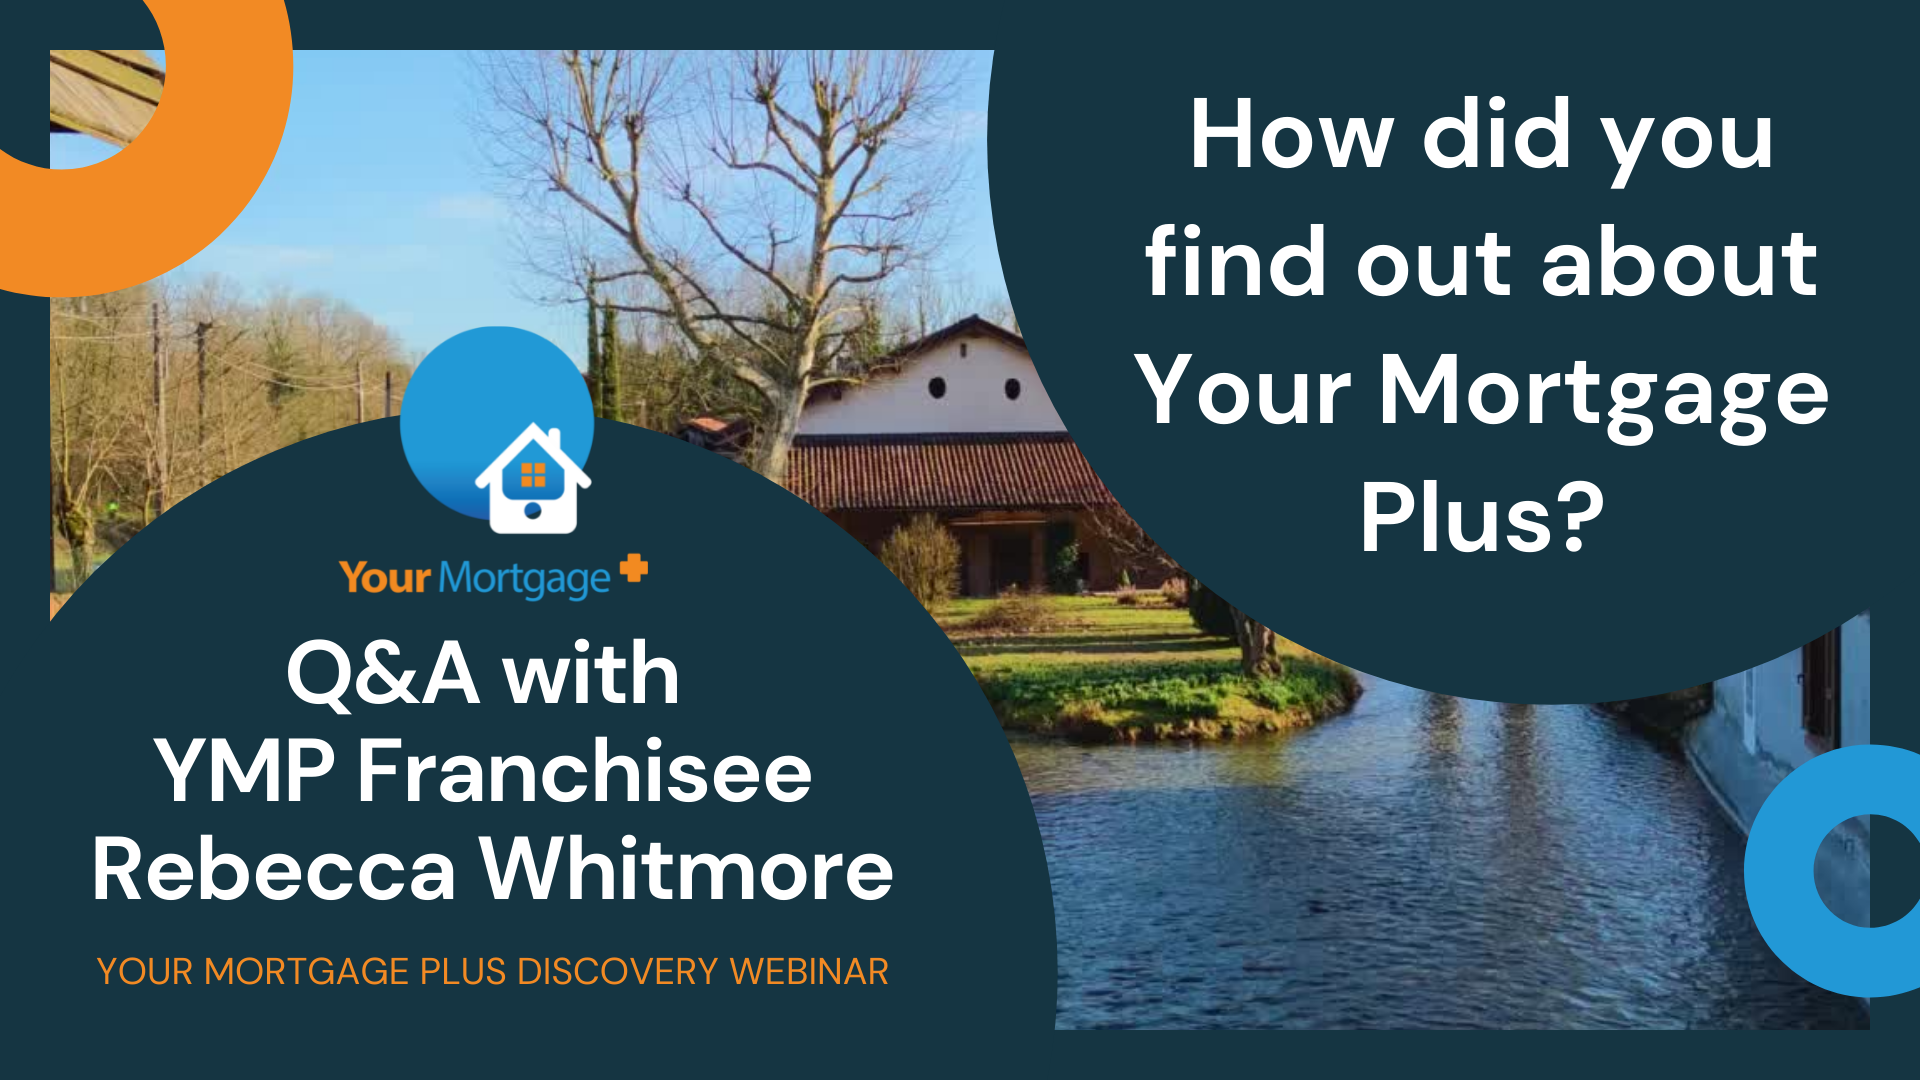 Q&A with Rebecca Whitmore | How did you find Your Mortgage Plus?